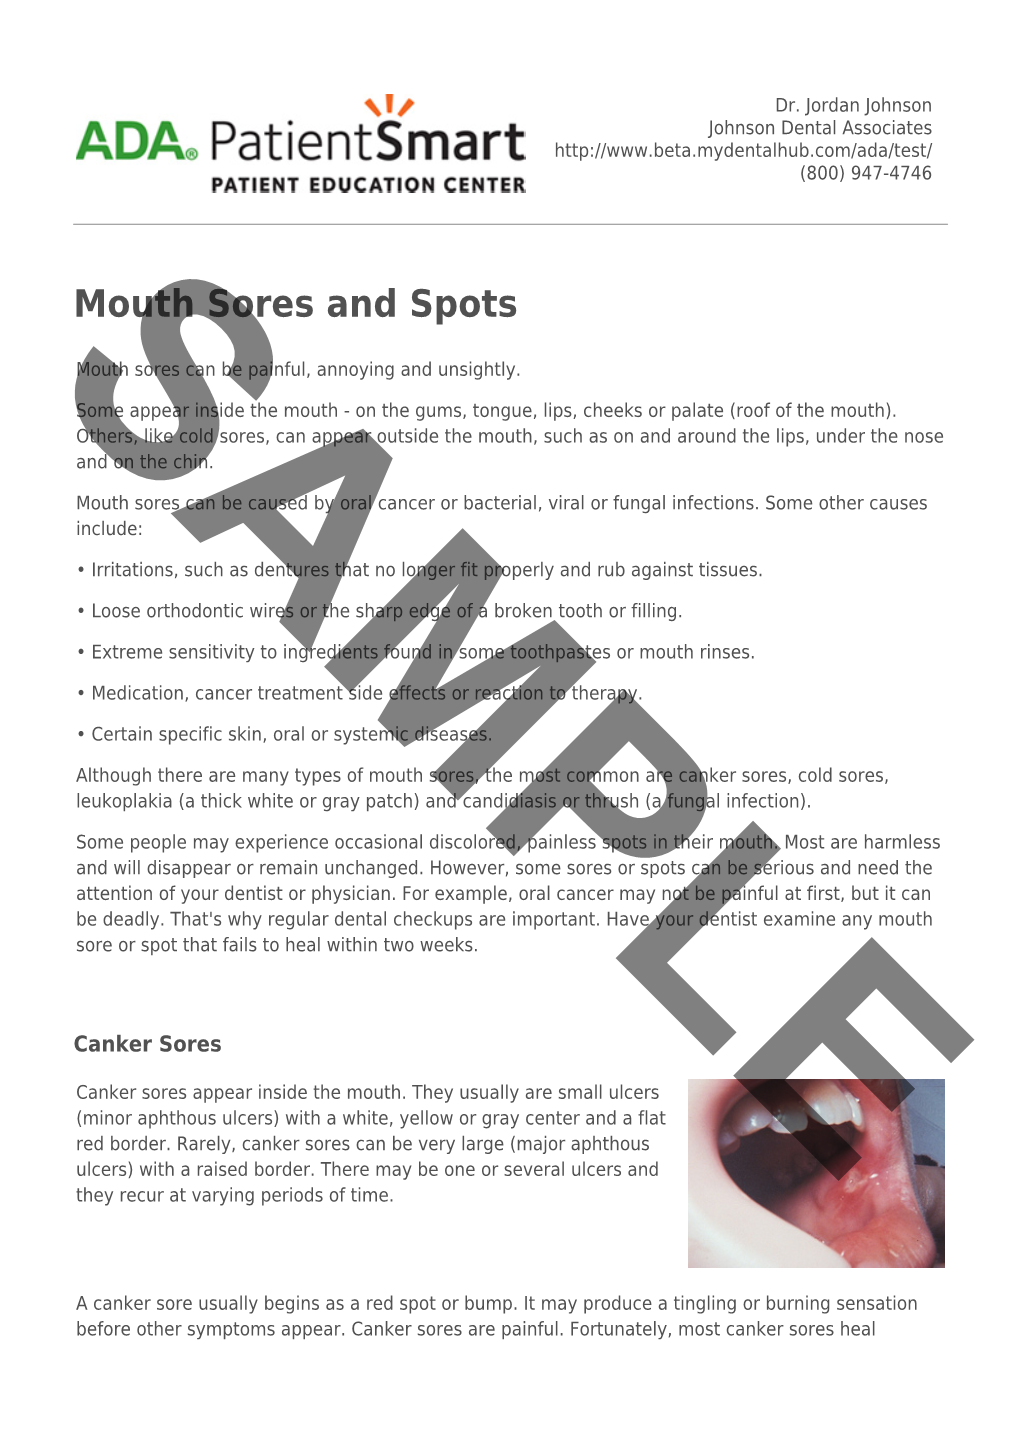 ADA Patient Smart | Mouth Sores and Spots